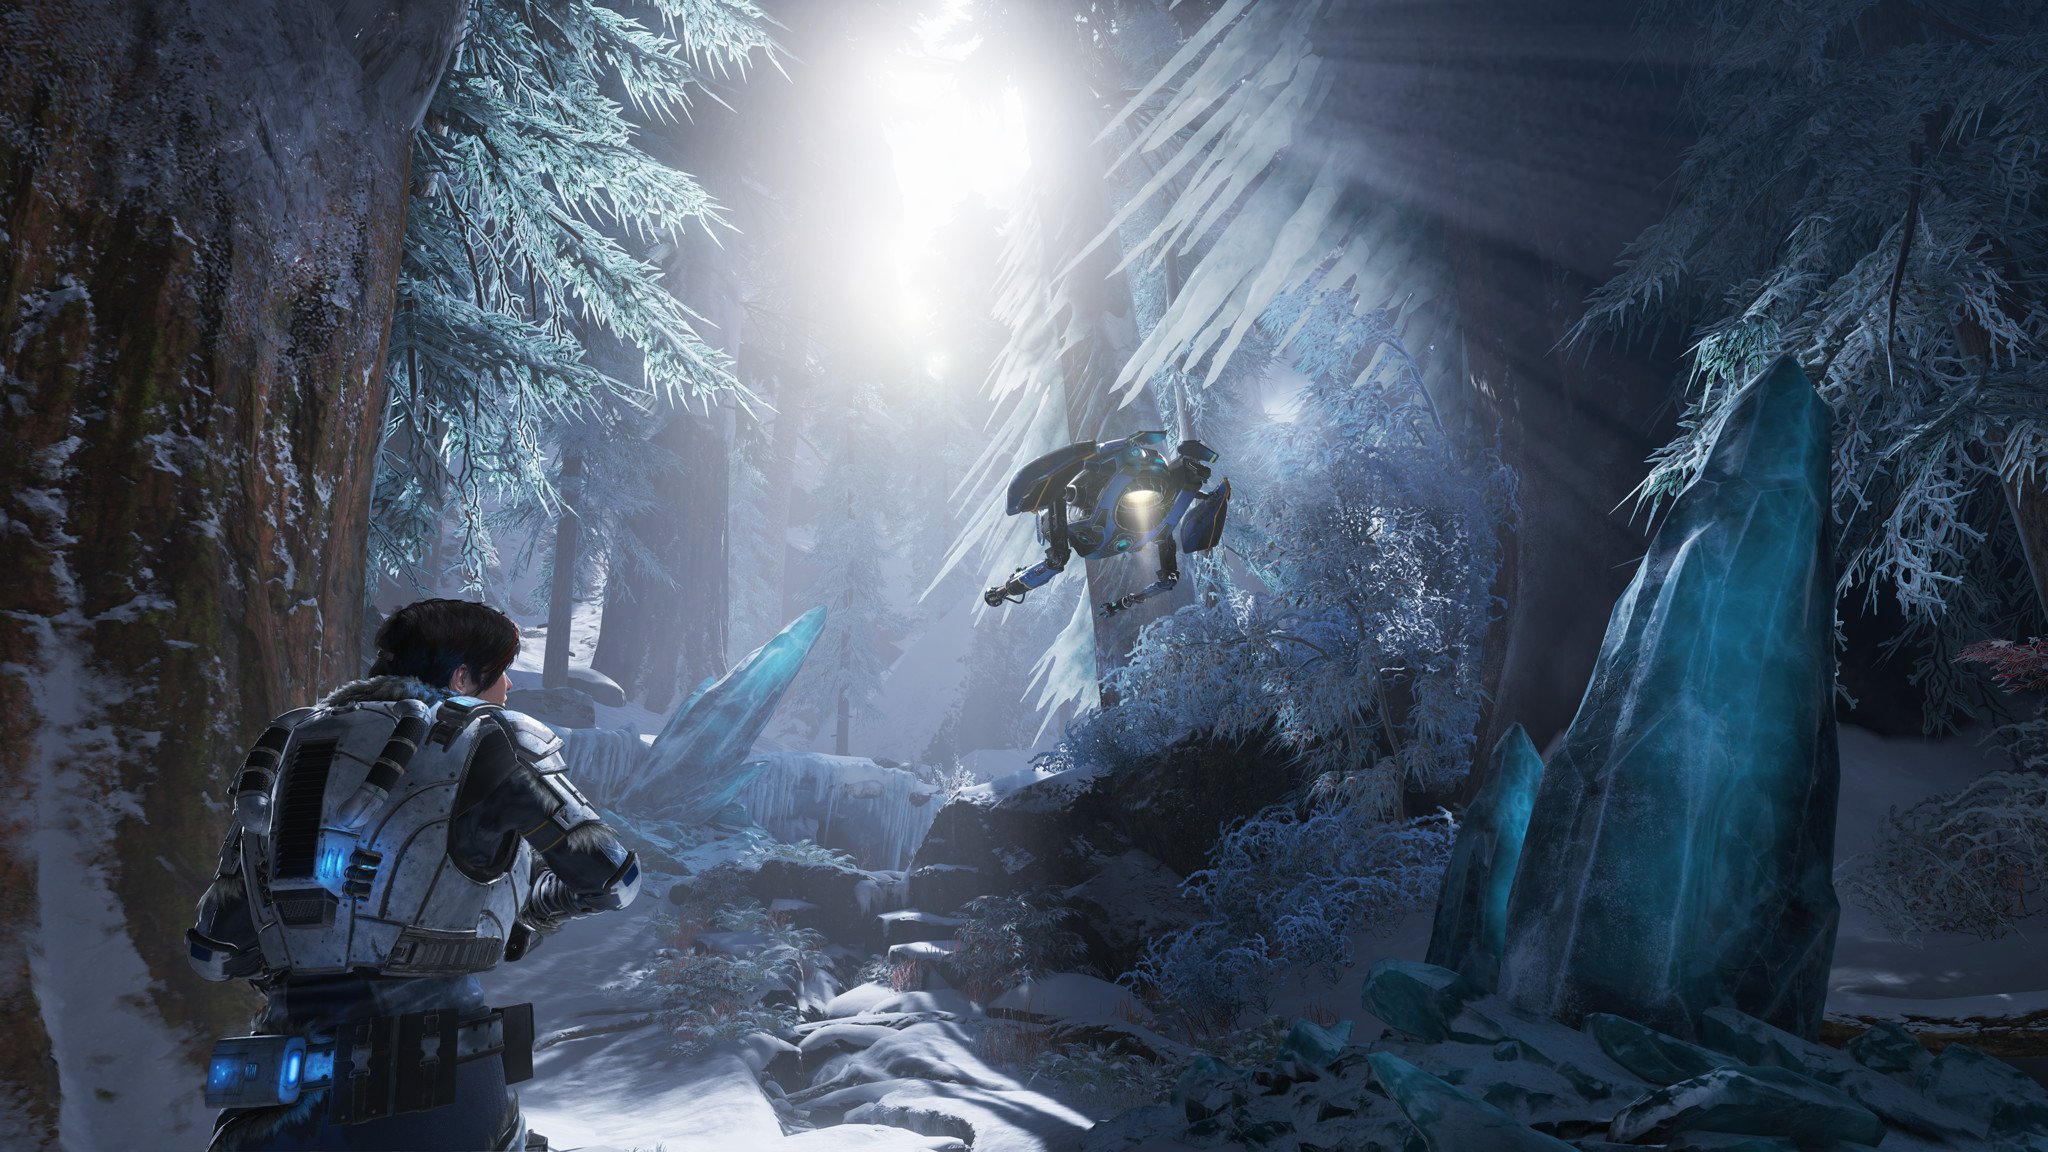 Gears 5 Cross-Play To Support Most Campaign and Multiplayer Modes